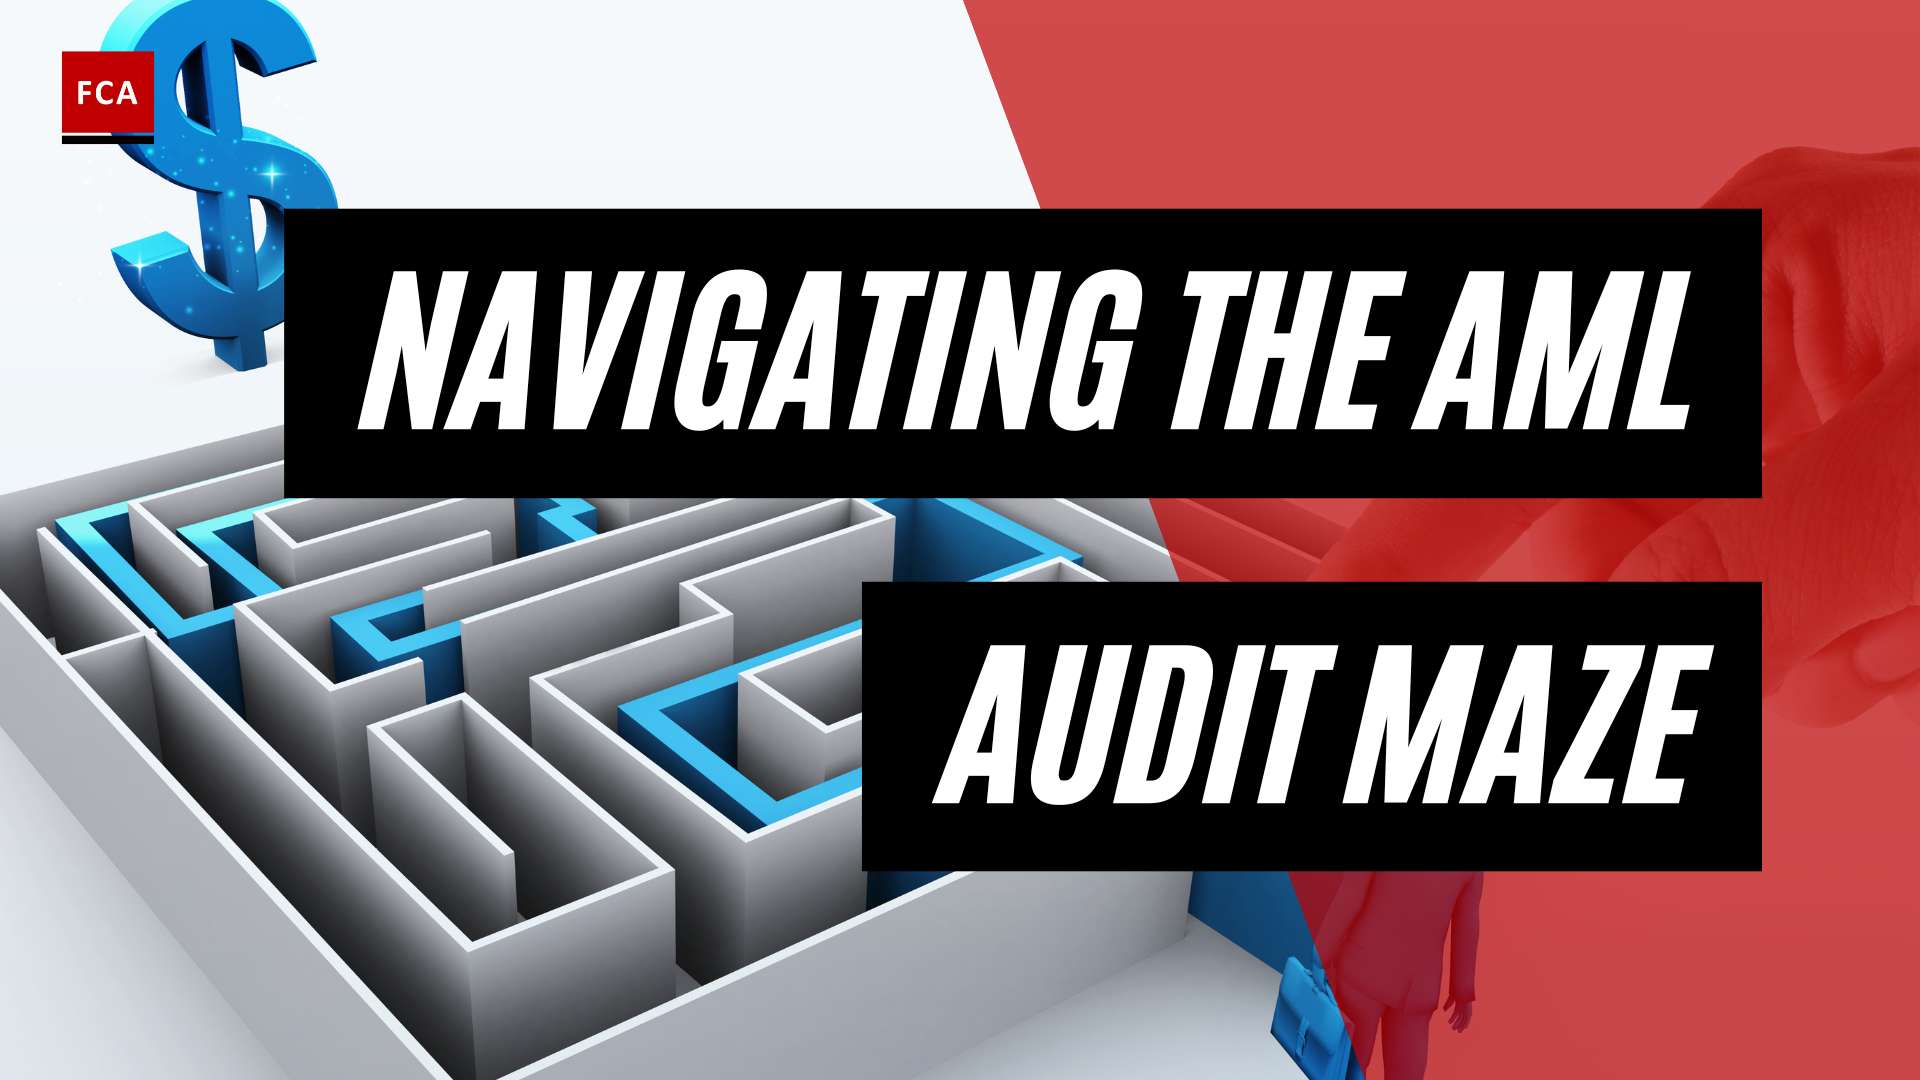 Navigating The Aml Audit Maze: A Step-By-Step Guide